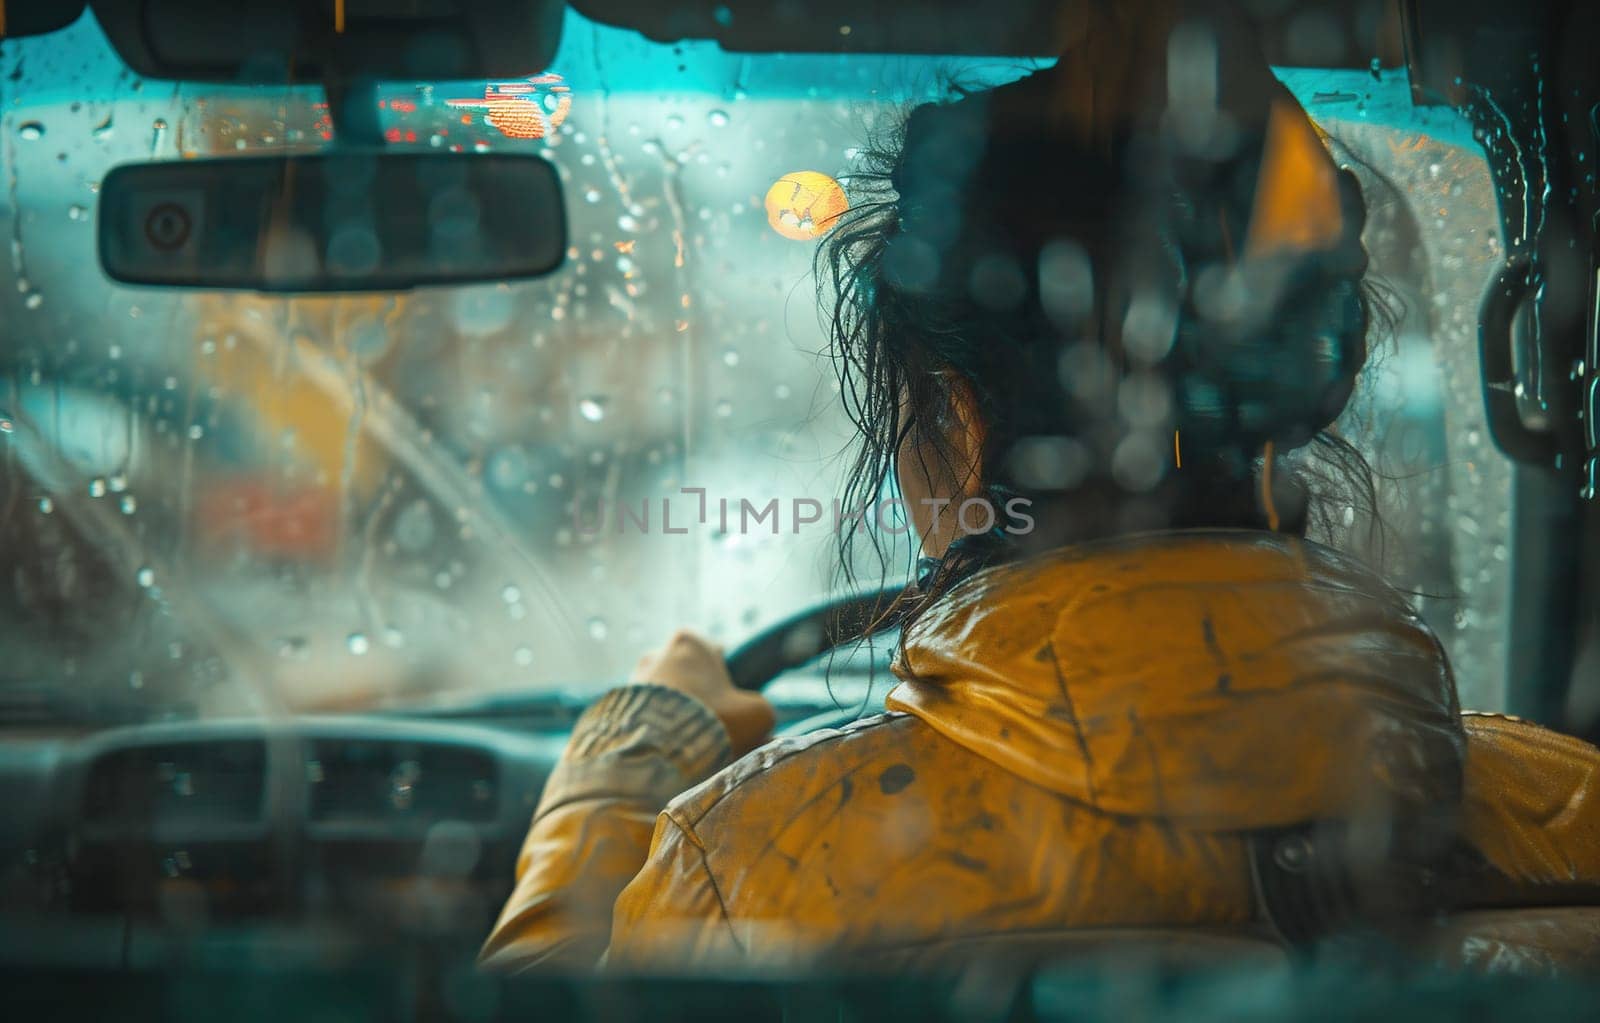 Young beautiful girl driver in the car. High quality photo